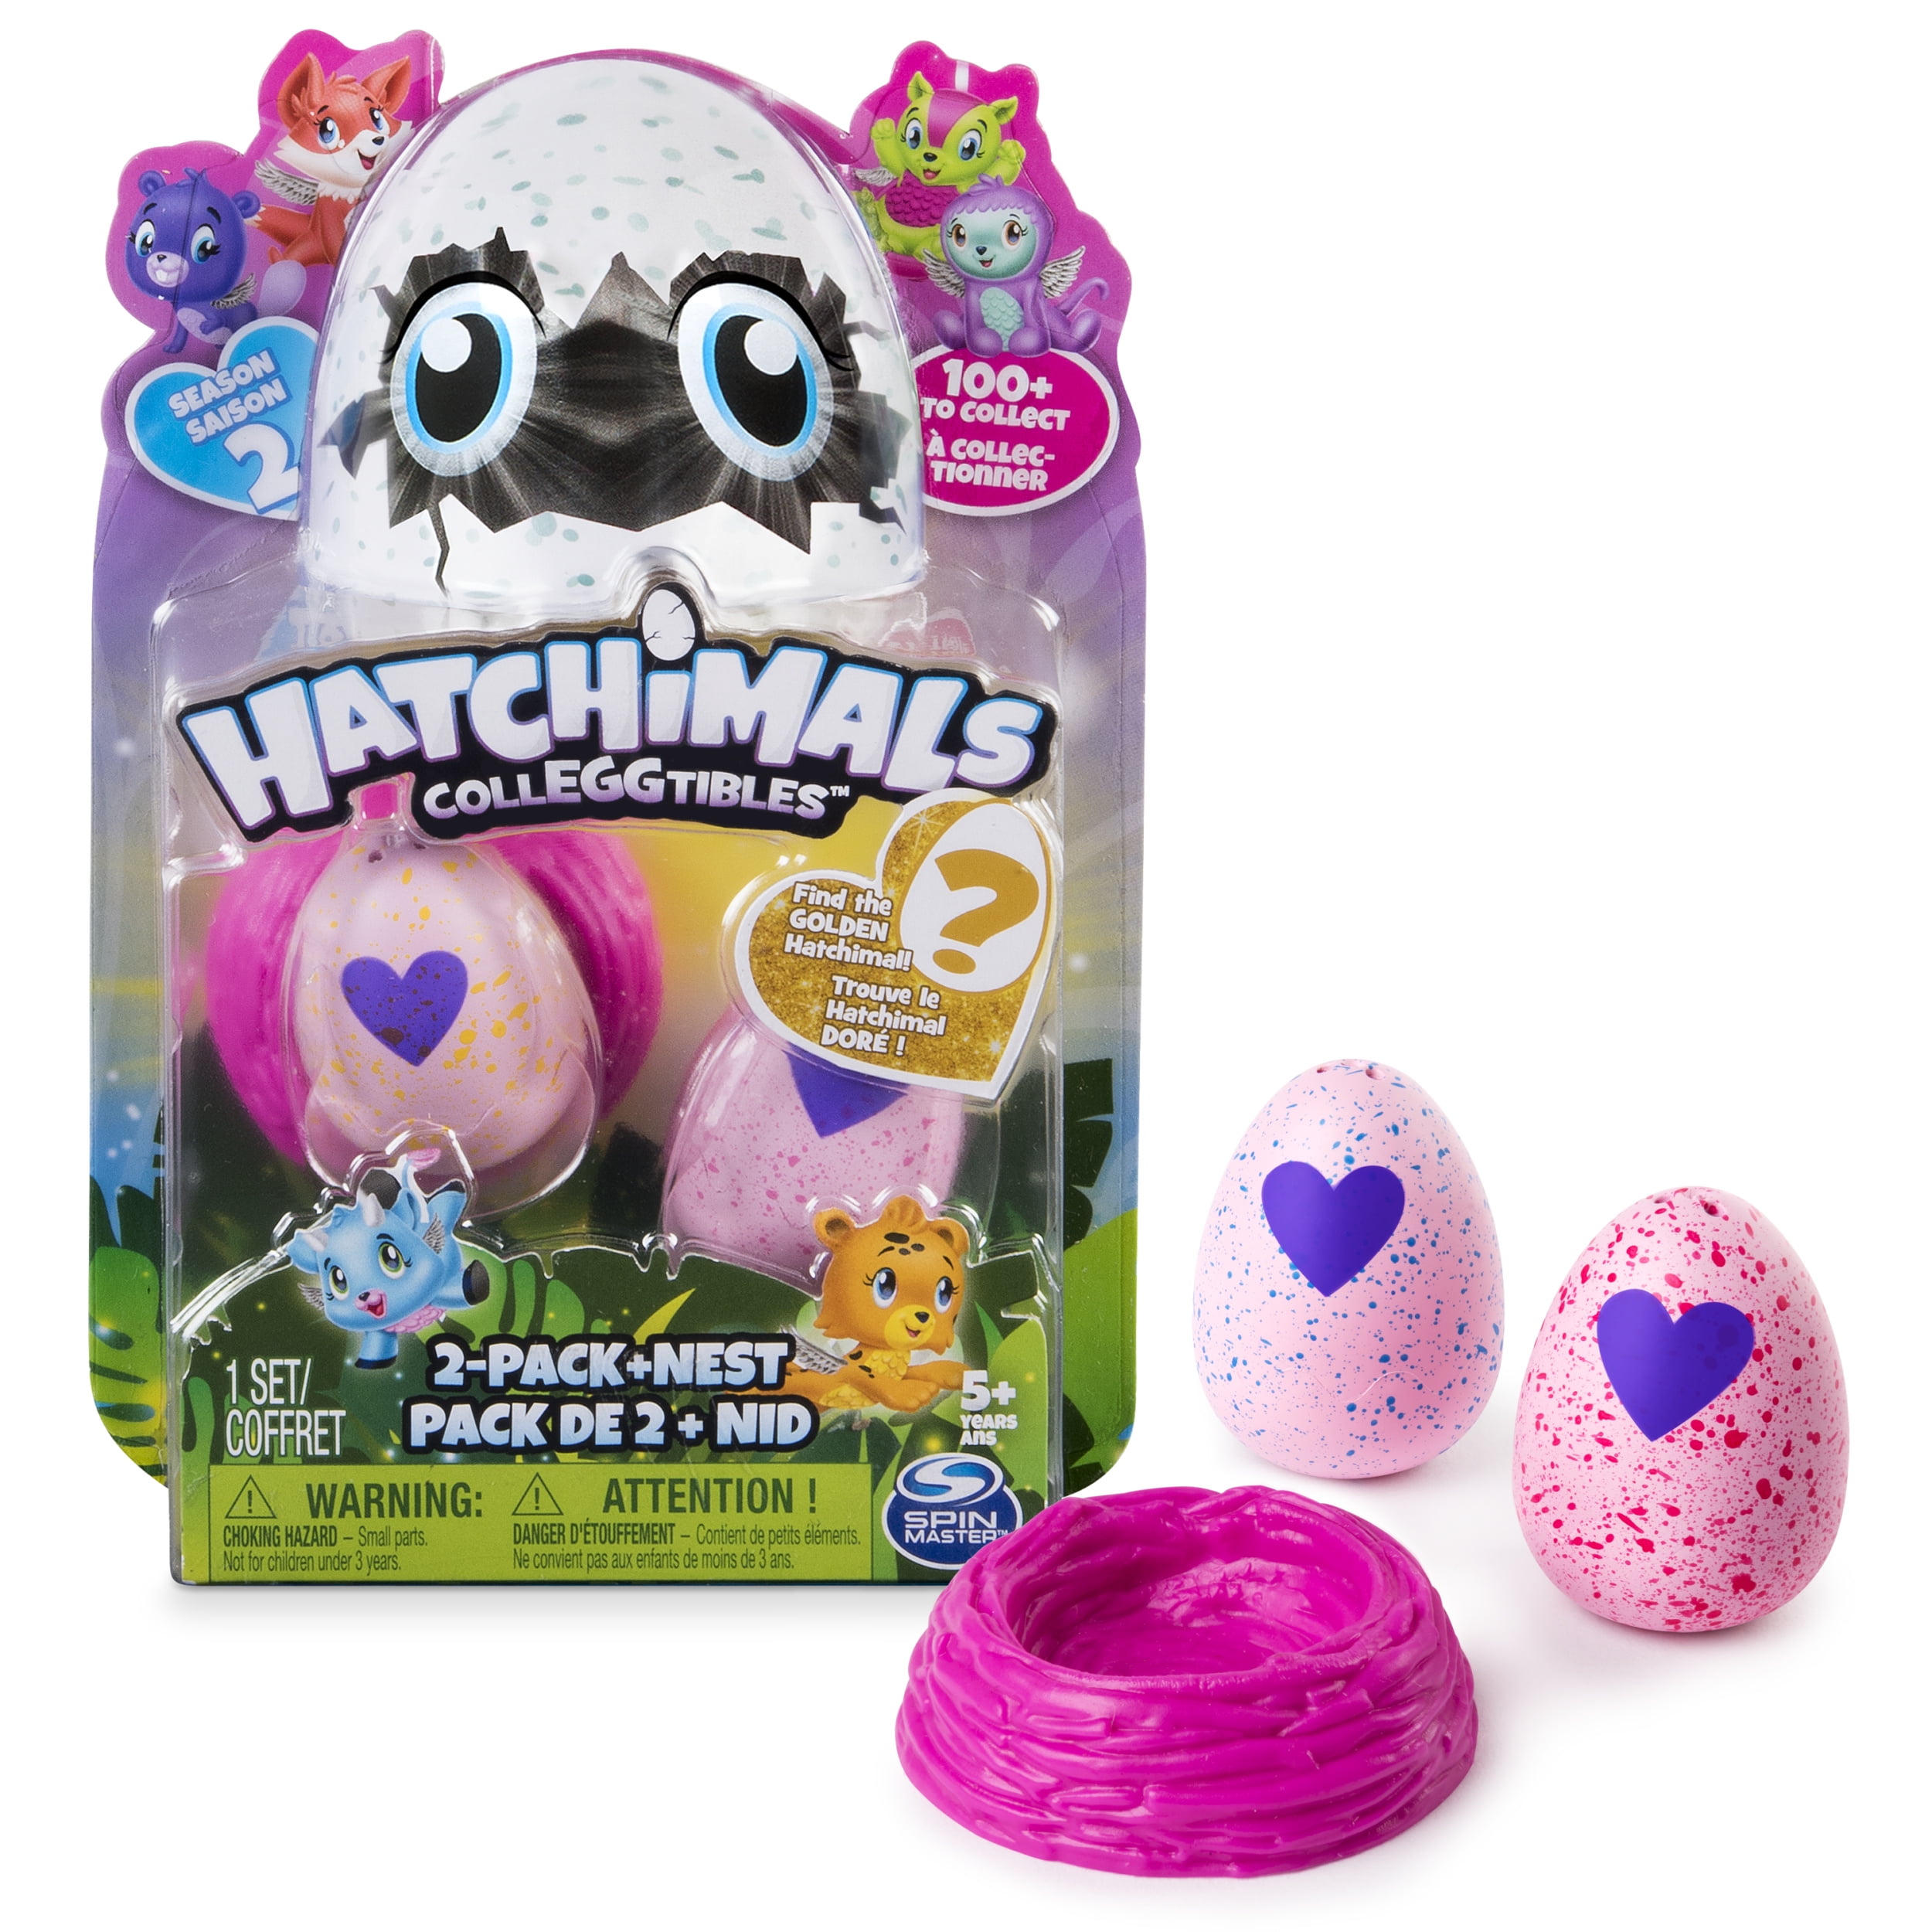 Details about   Hatchimals Colleggtibles ---2 Pack Collectible egg with Nest Season 2 